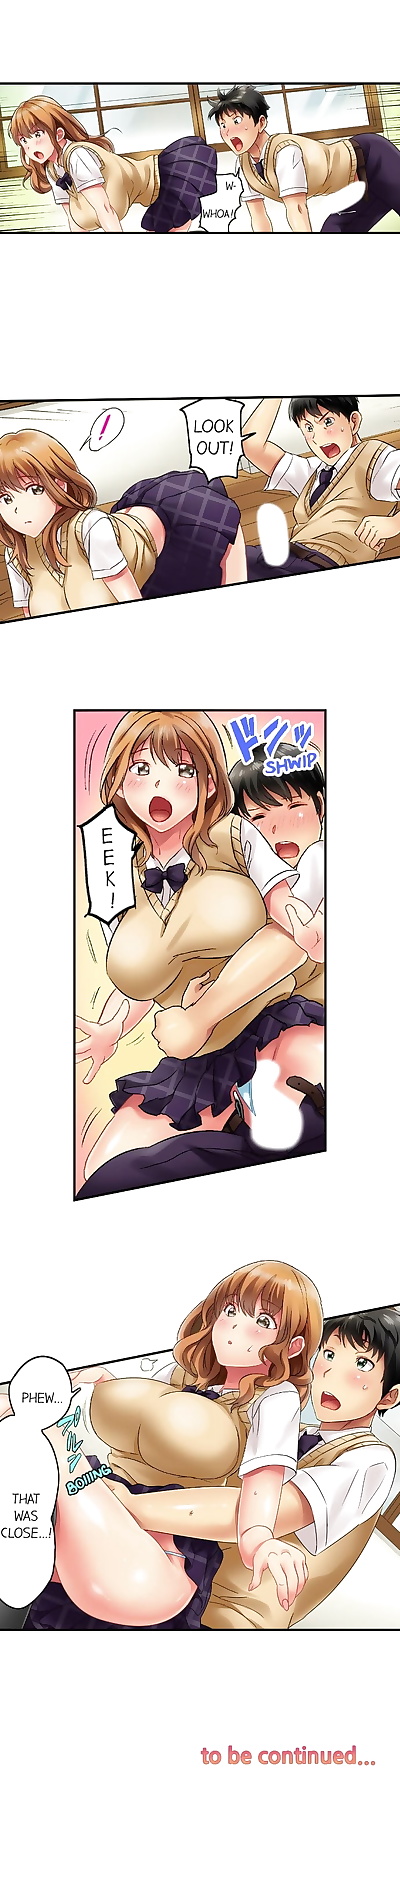 english manga Seeing Her Panties Lets Me Stick In Ch.1, full color  manga